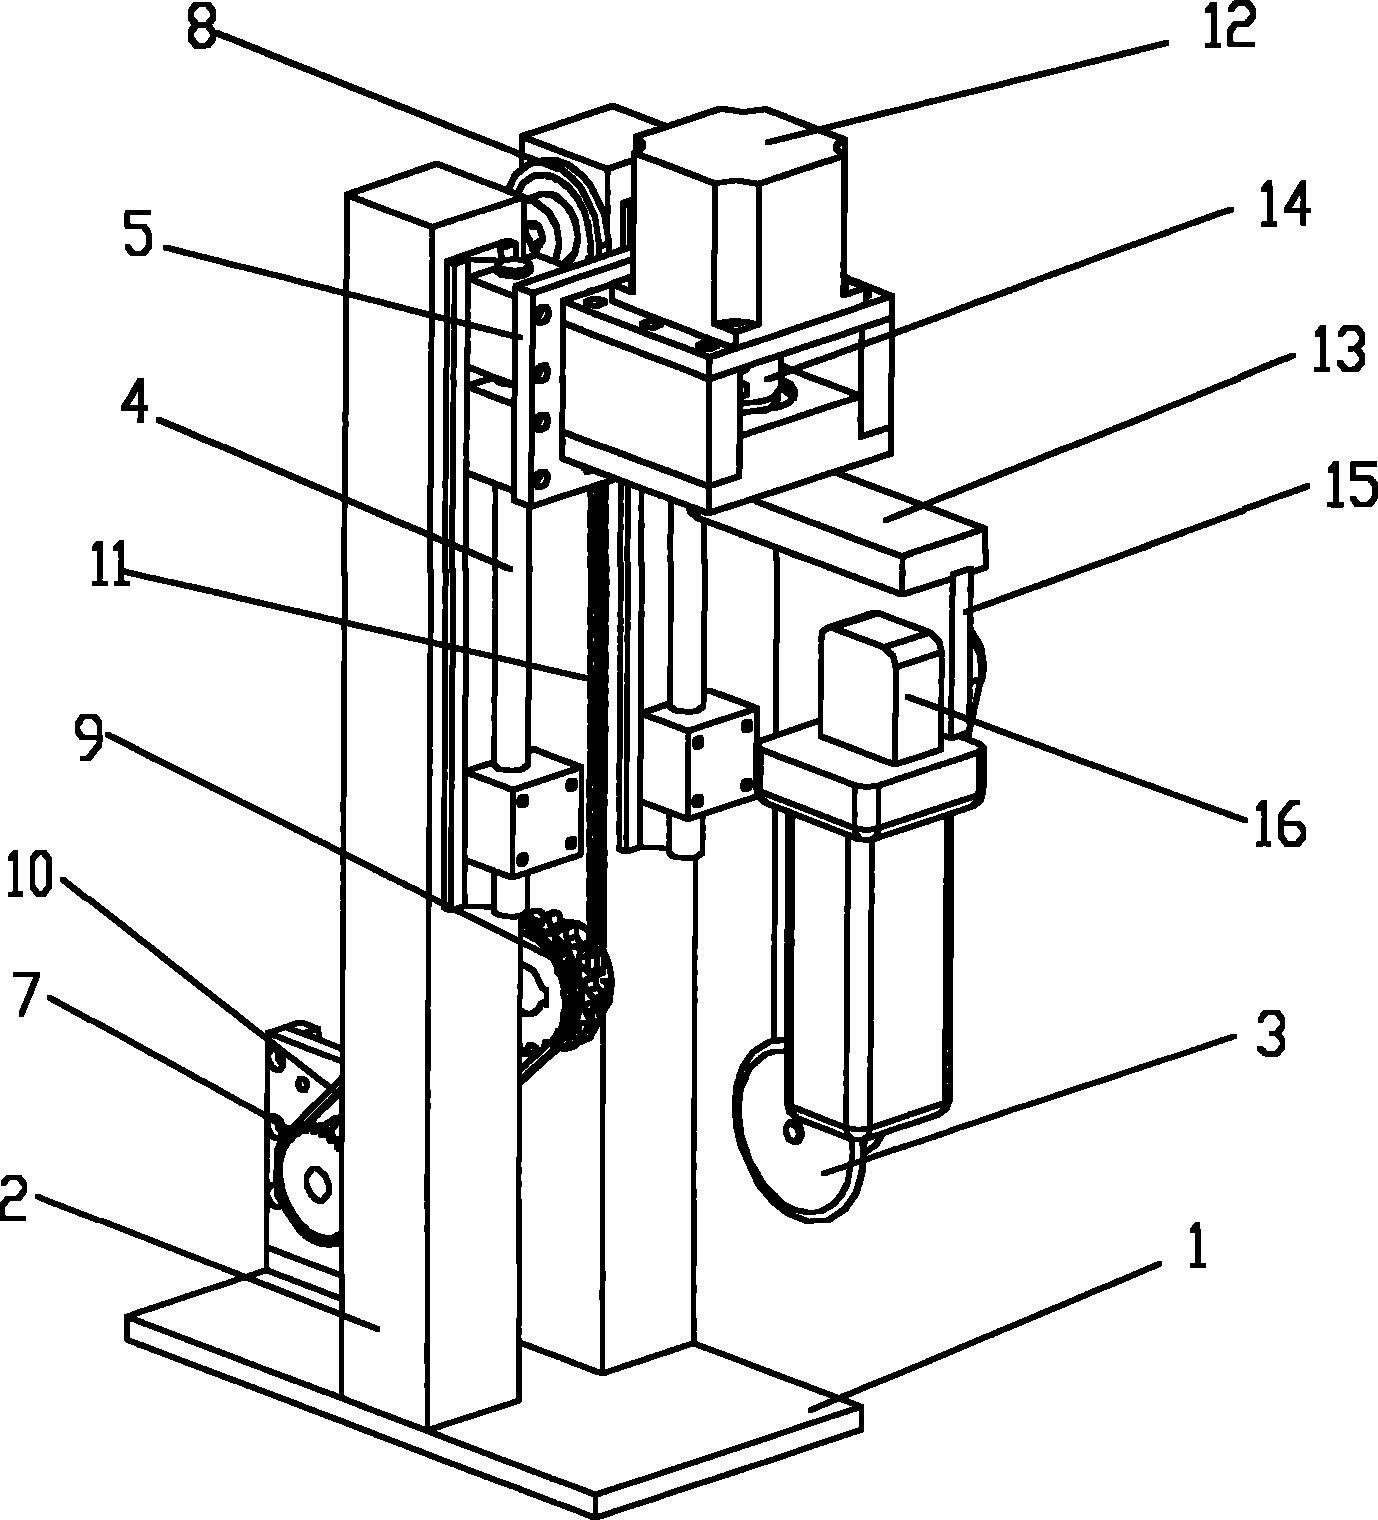 Automatic grooving device for numeric control bender